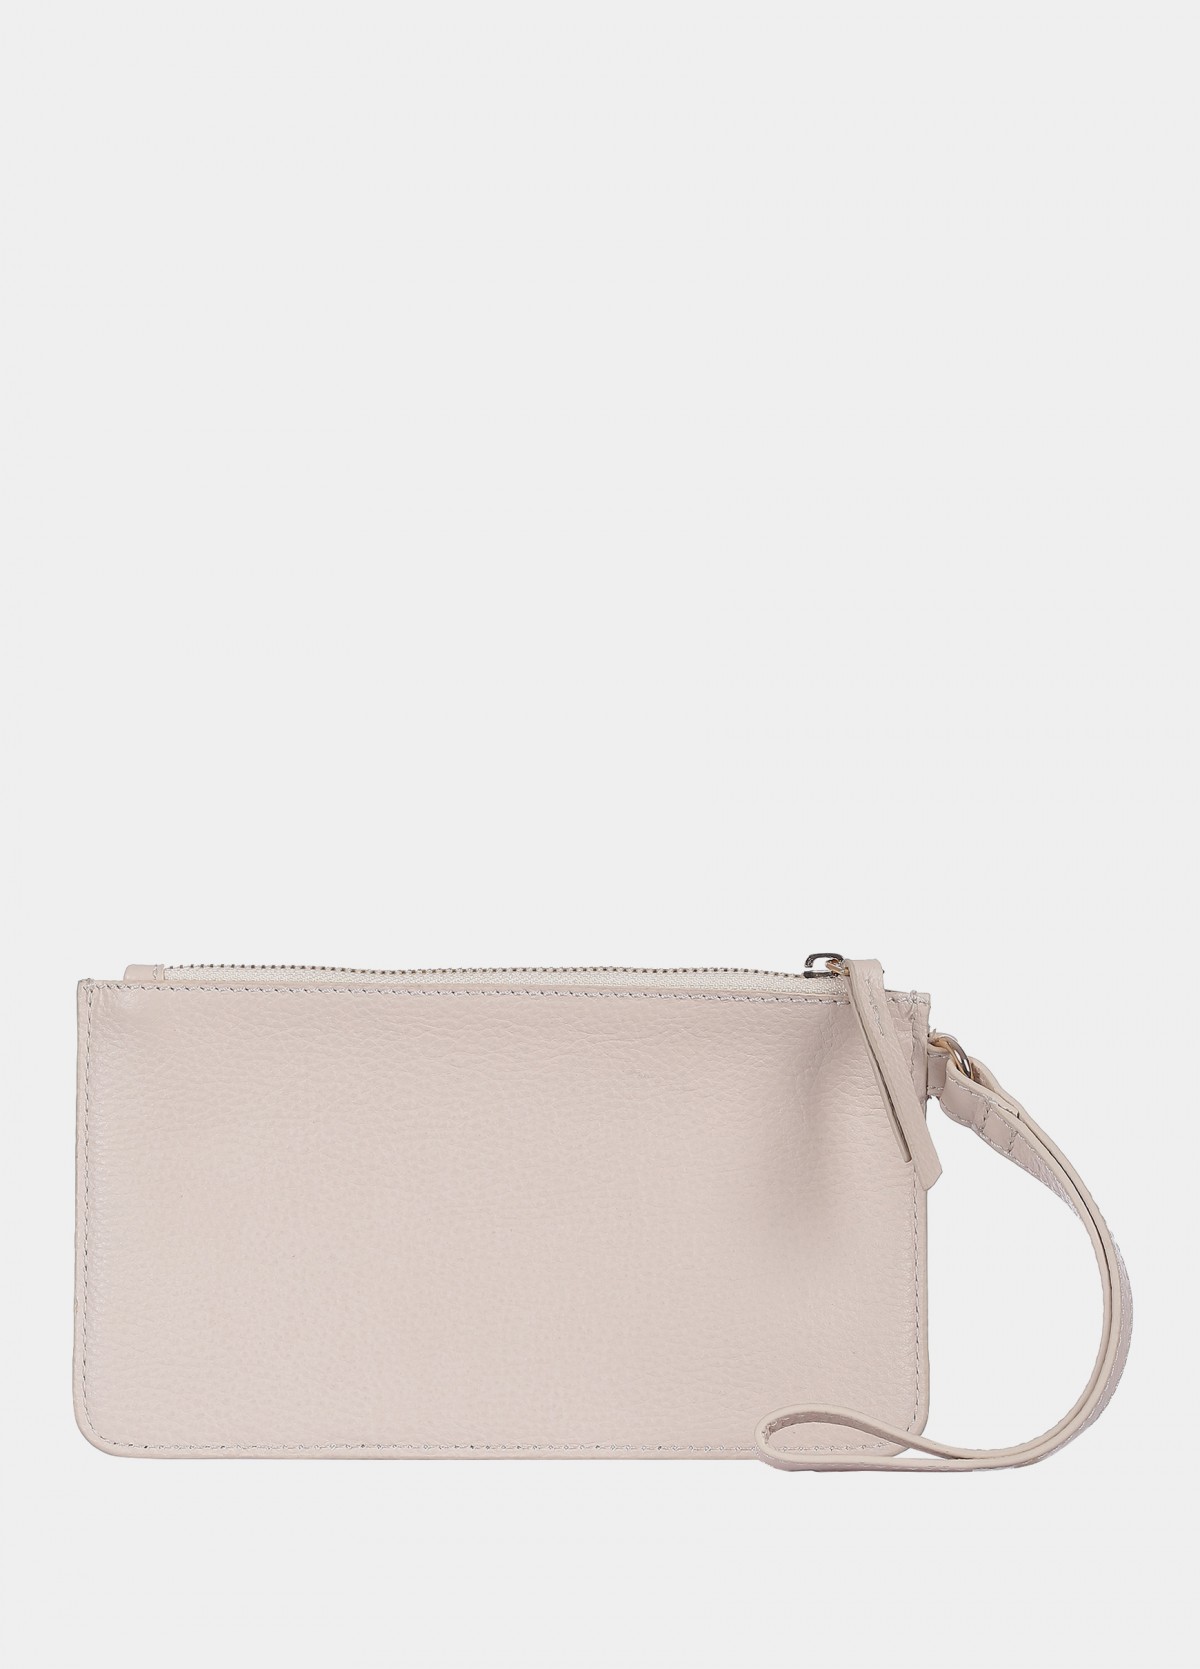 The Chic Bag